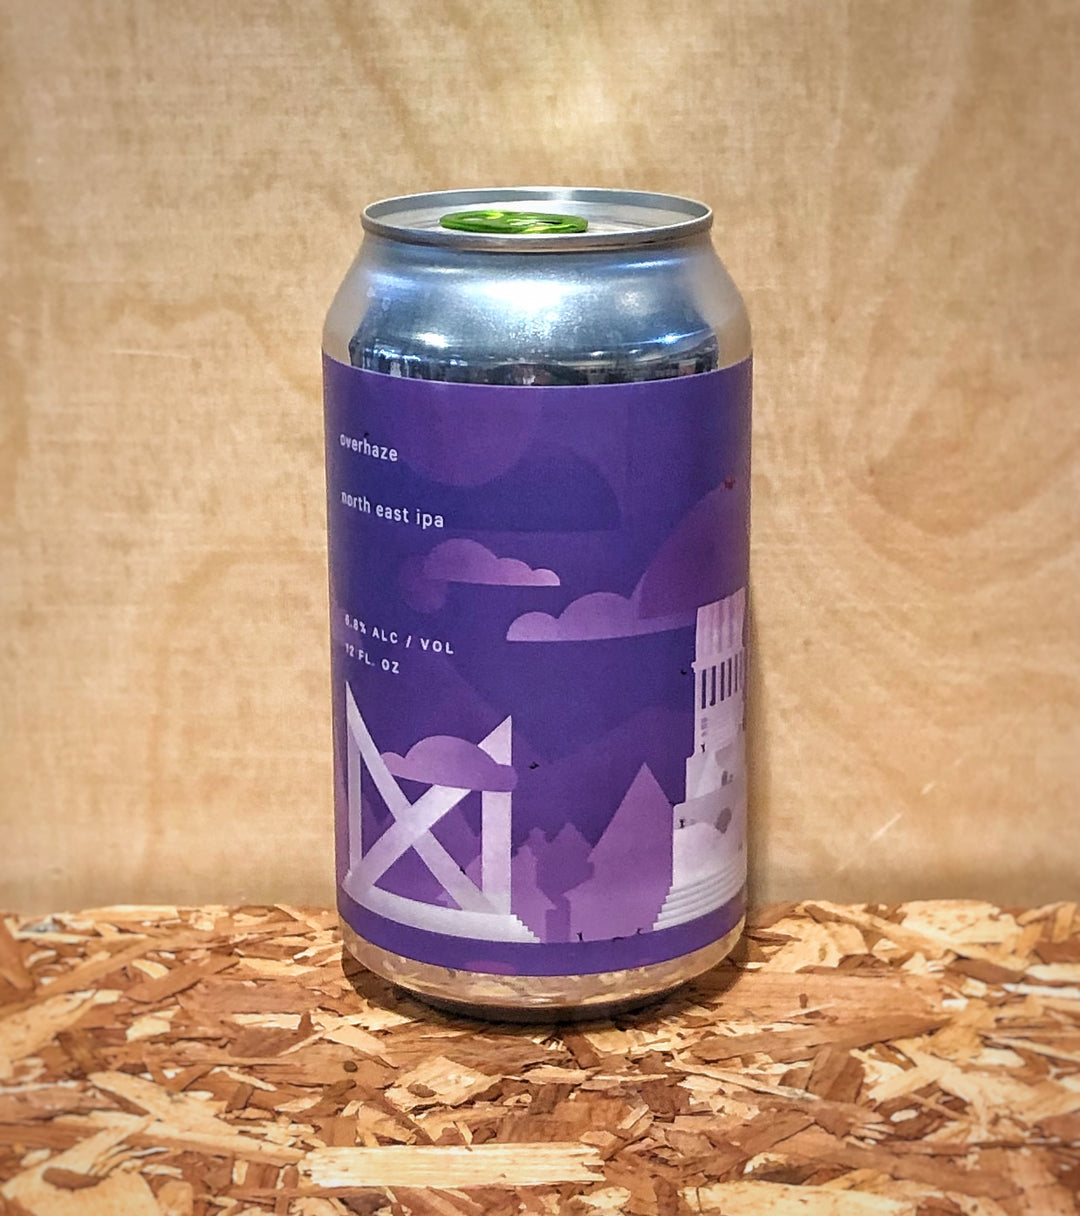 Marz Community Brewing Co. 'Overhaze' North East IPA (Chicago, IL)